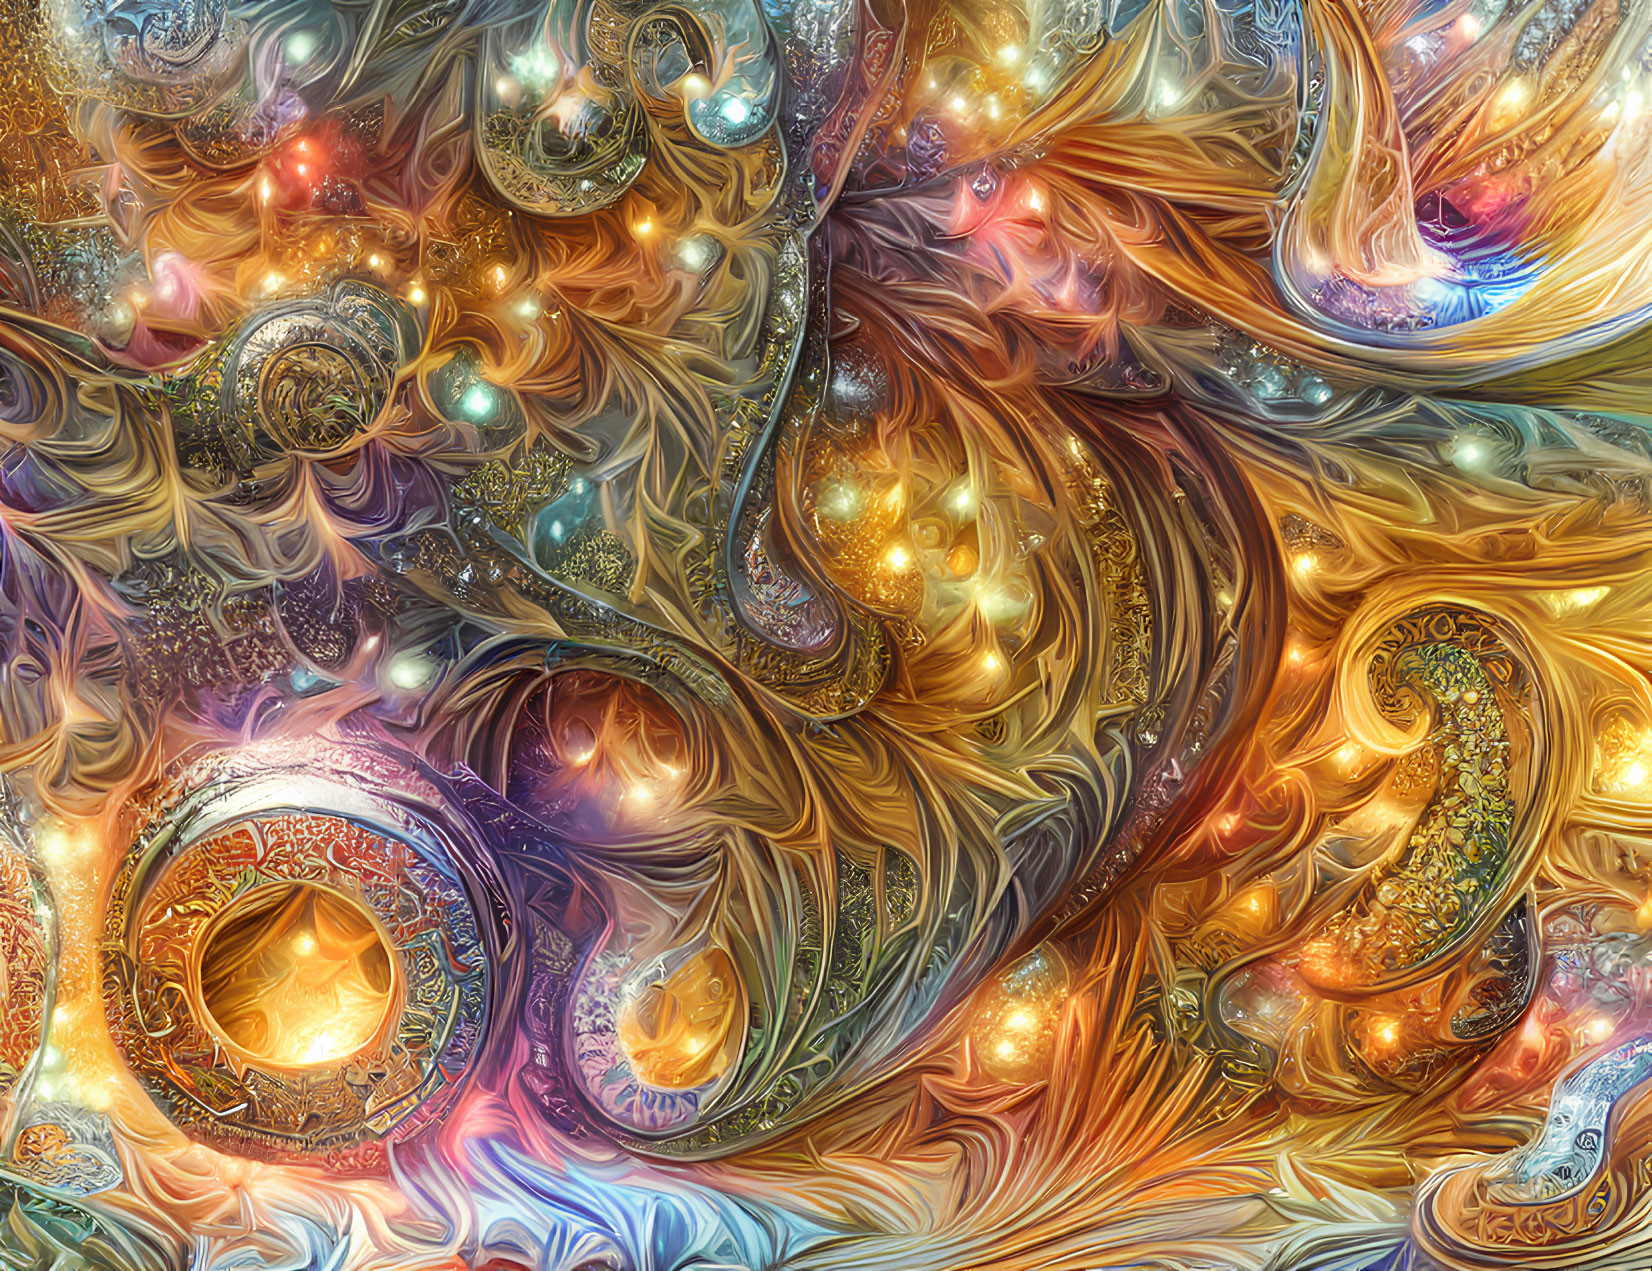 Colorful Fractal Image with Gold, Blue, and Orange Swirling Patterns